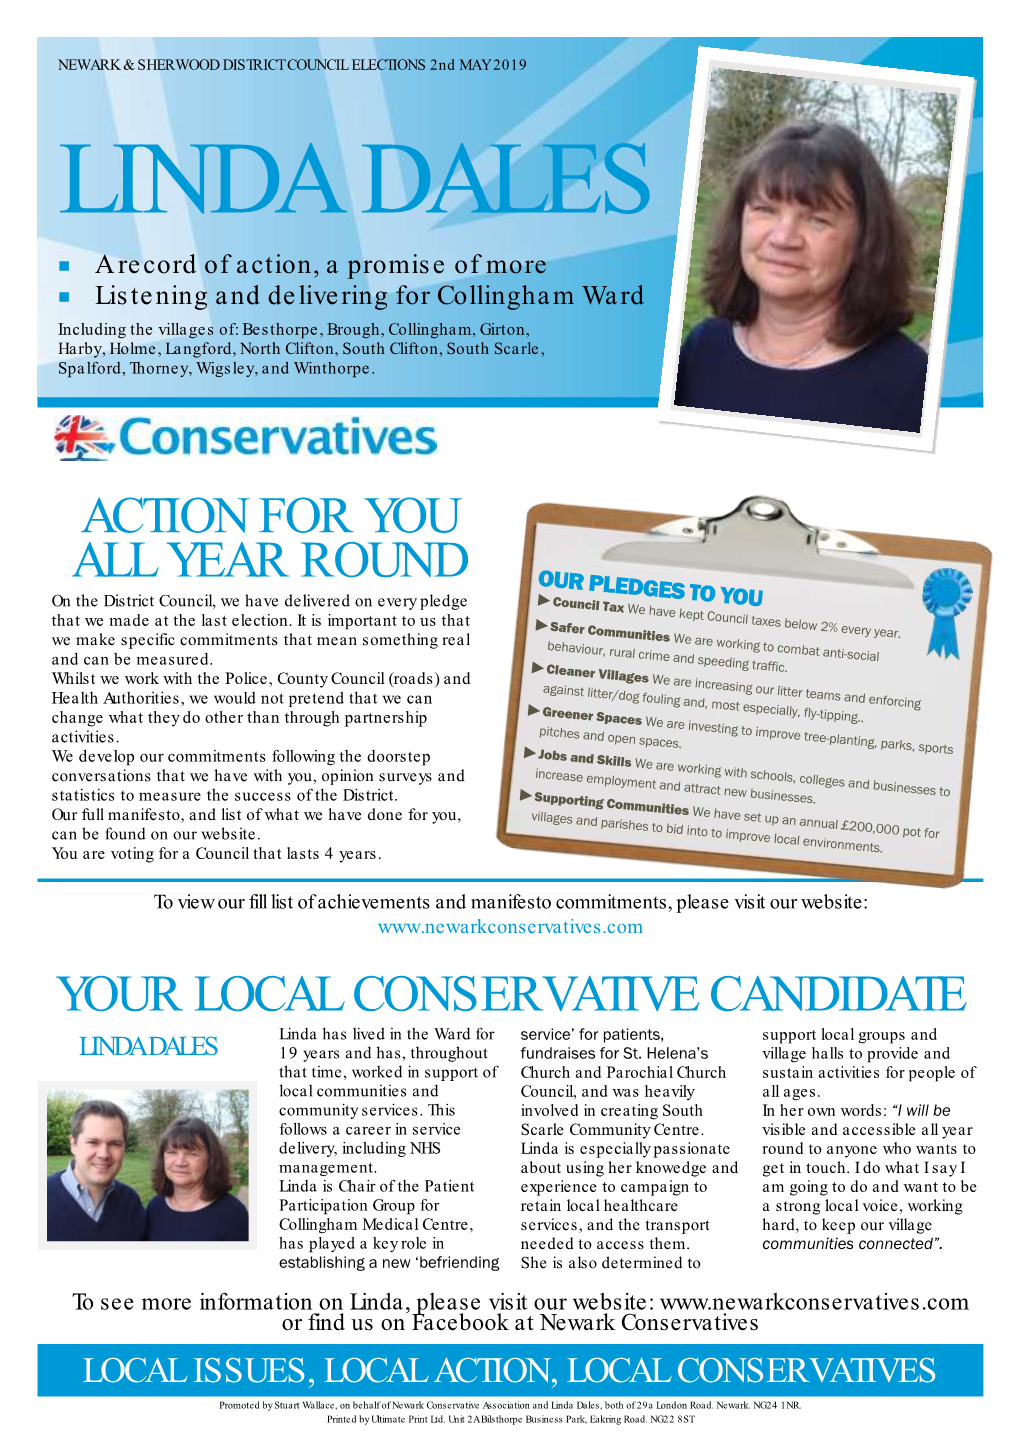 LINDA DALES ■ a Record of Action, a Promise of More ■ Listening and Delivering for Collingham Ward